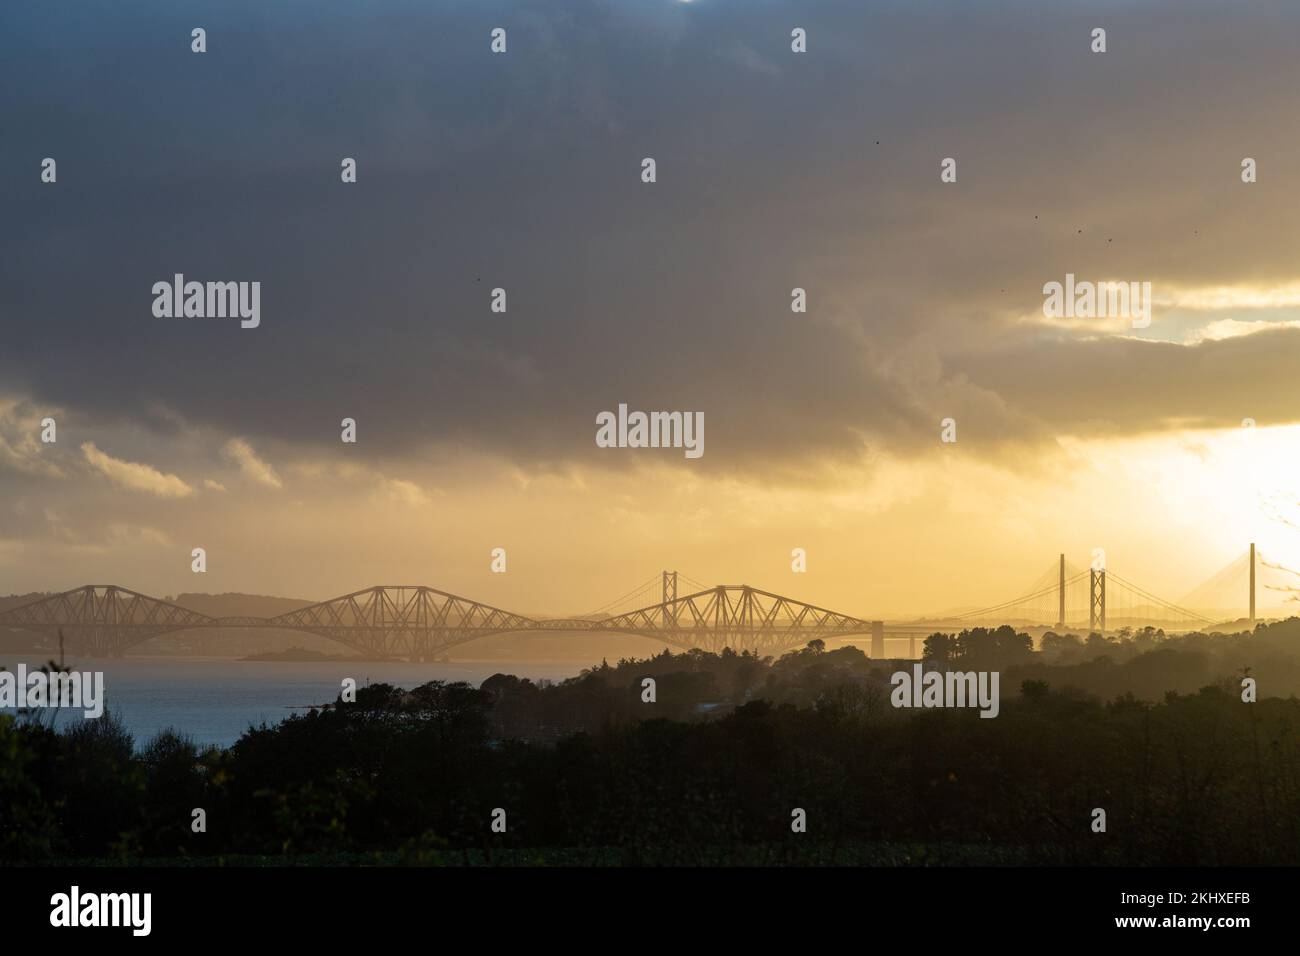 All three Bridges across the Firth of Forth at sunset from Dalgety bay, Fife. Stock Photo